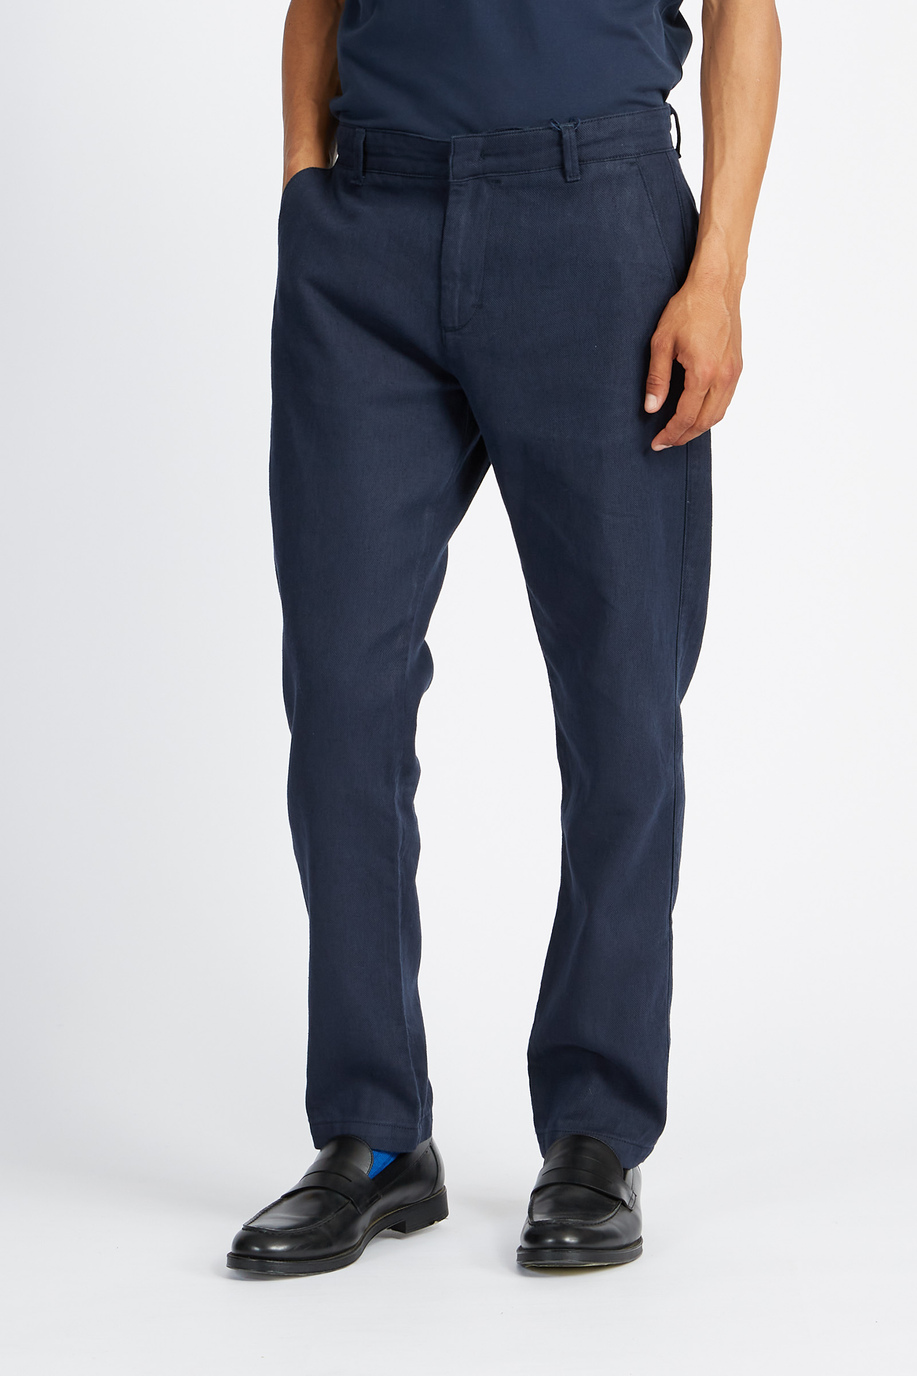 Straight cut men's chino trousers in plain color Logos - Vickan - Our favourites for him | La Martina - Official Online Shop